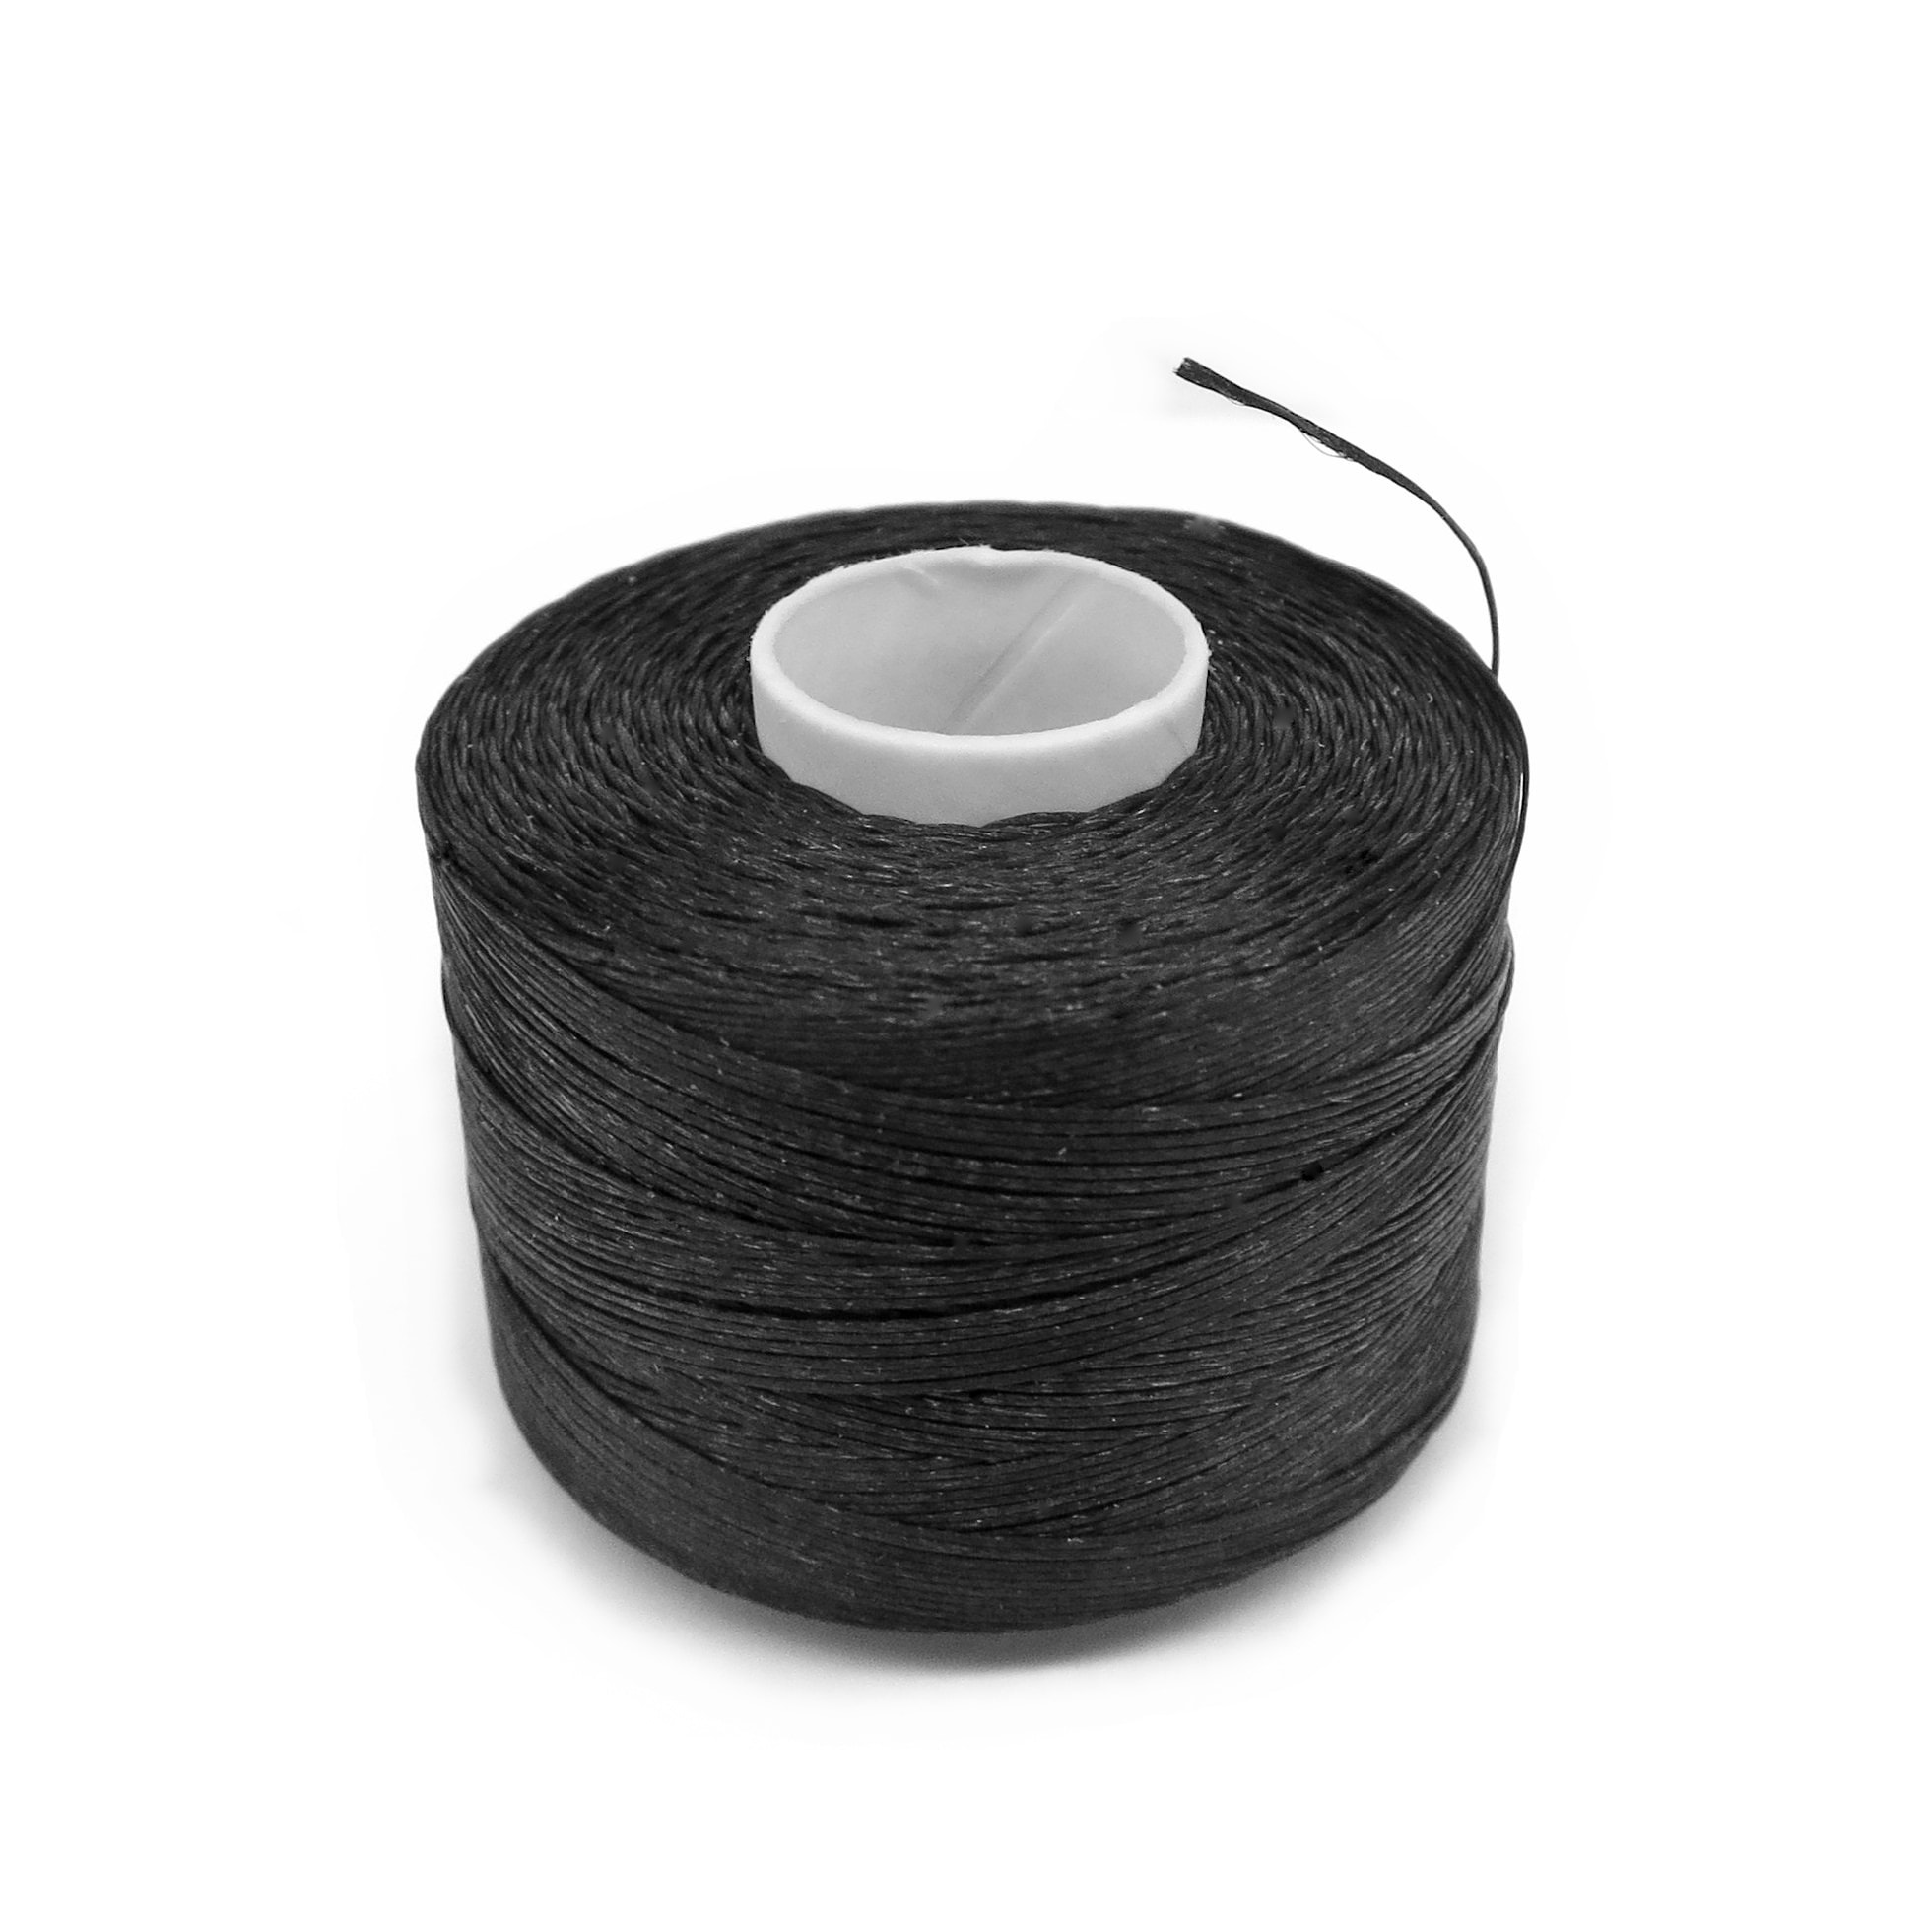 Nymo beading thread, size D, extremely durable black sewing thread, 58m